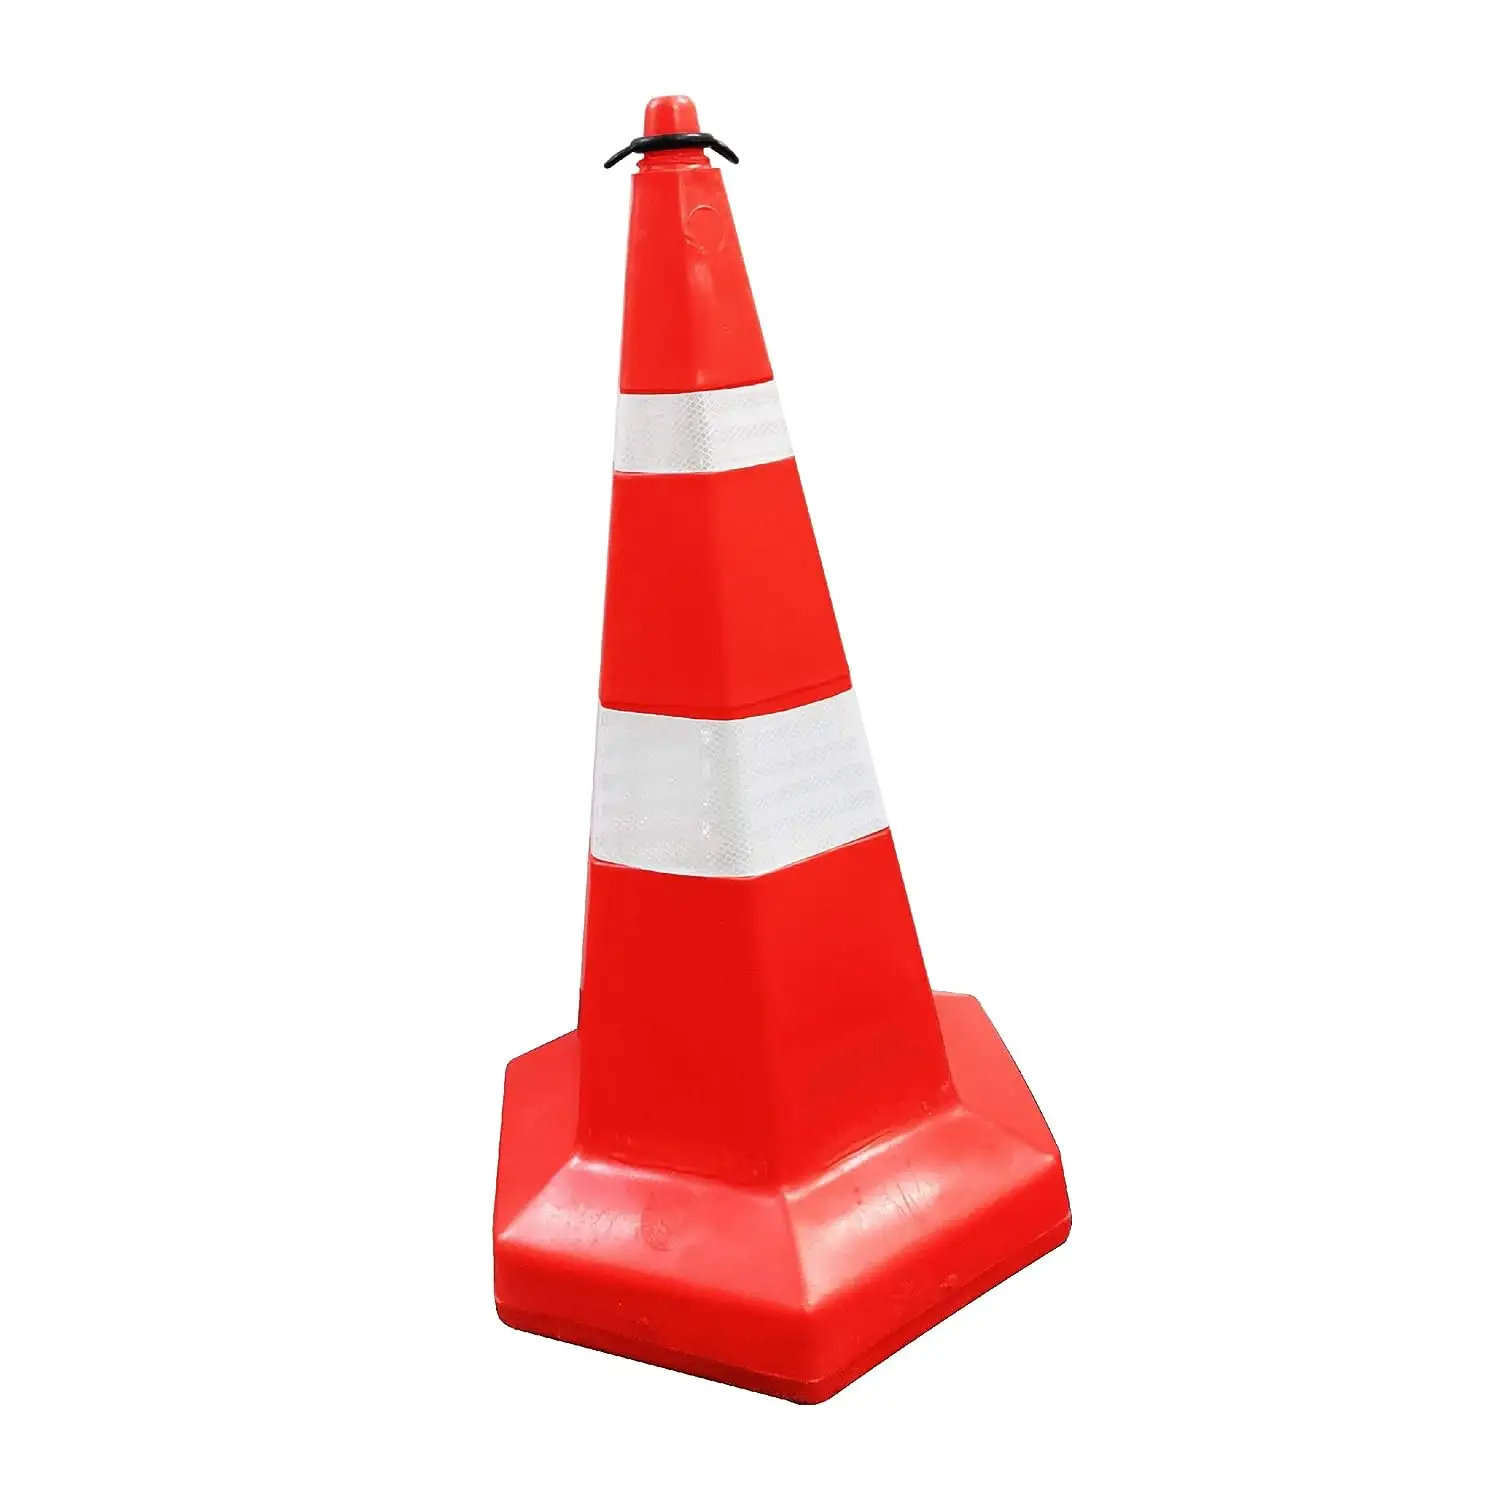 Wholesale Factory Prices top quality Road safety Construction Warning parking reflect rubber traffic cone moulded safety cones